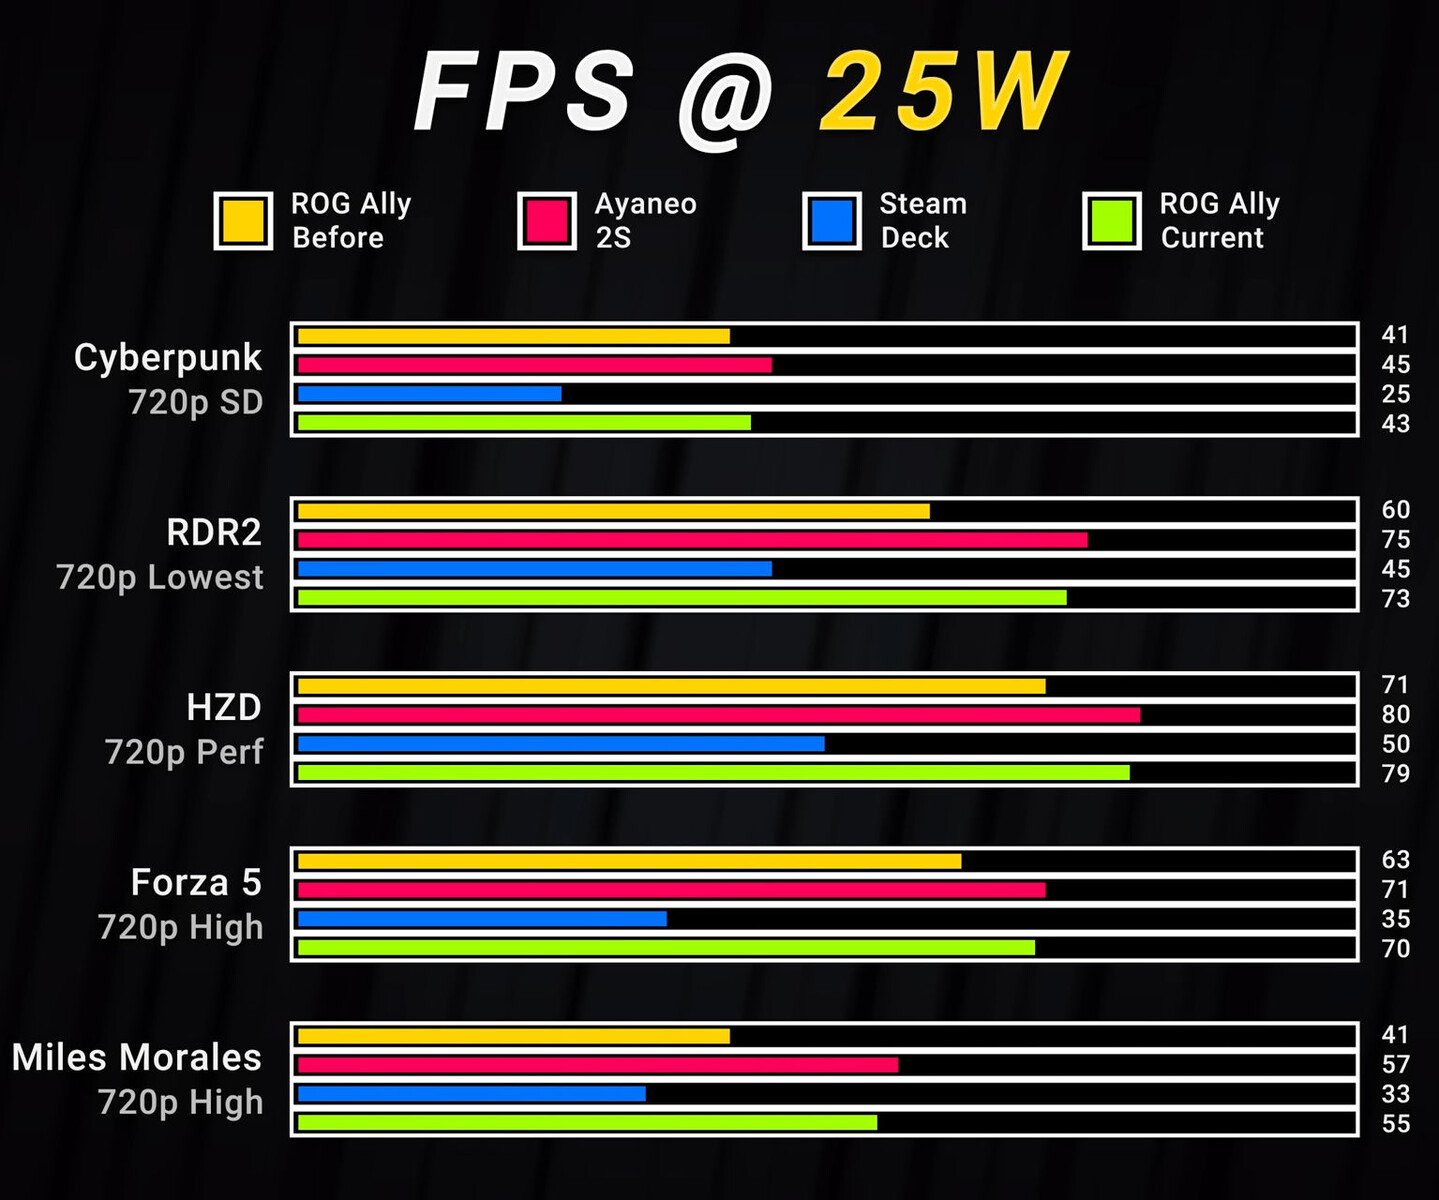 News - Hardware - ROG ALLY has 8TF performance in boost mode. Pricing  aiming under $1000. Launches may 11 with 3 months of gamepass, Page 4